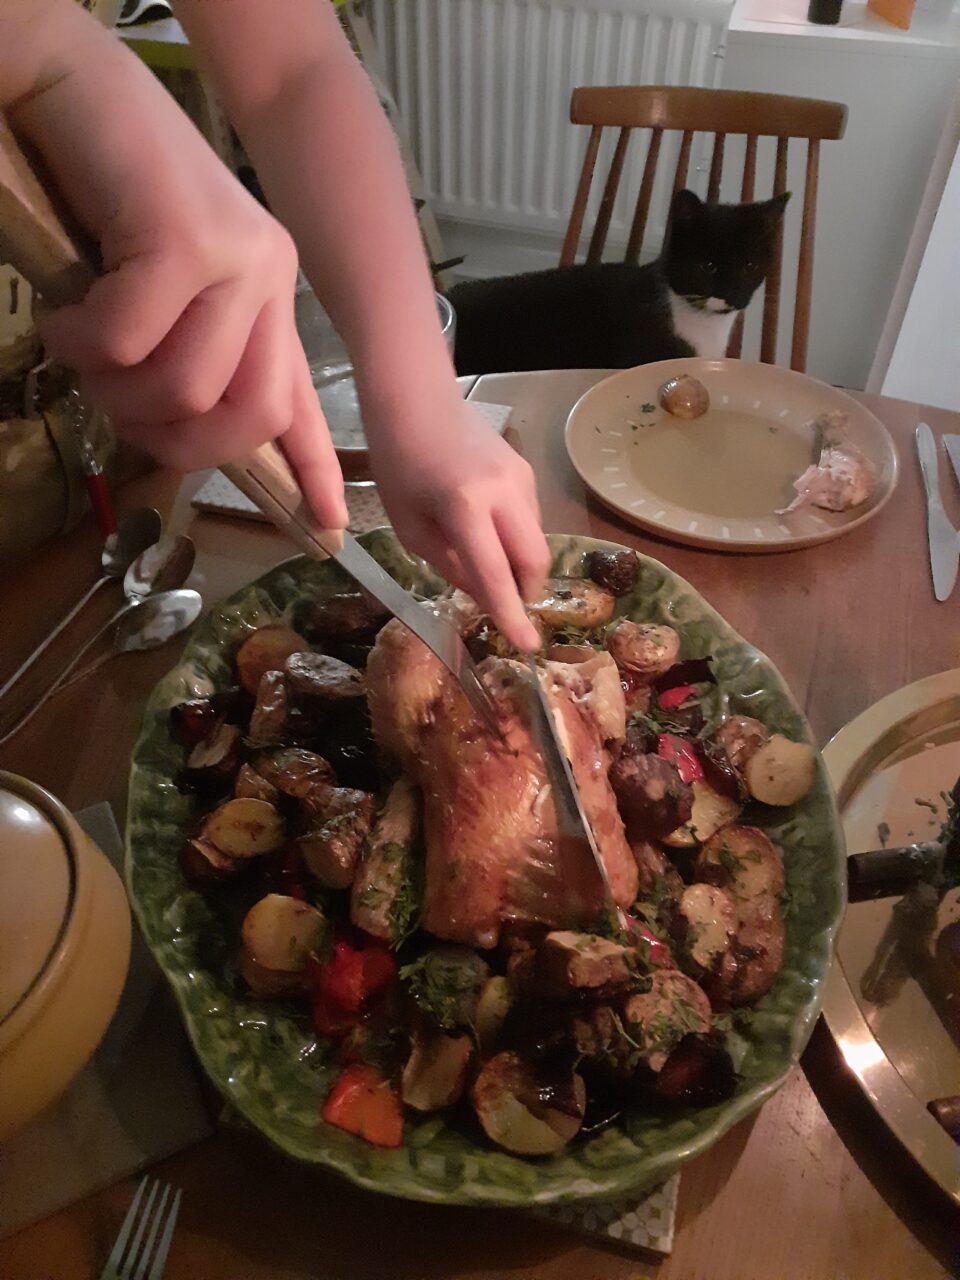 A roast chicken on a green plate surrounded by vegetables is carved. A black and white cat looks on hungrily in the background.